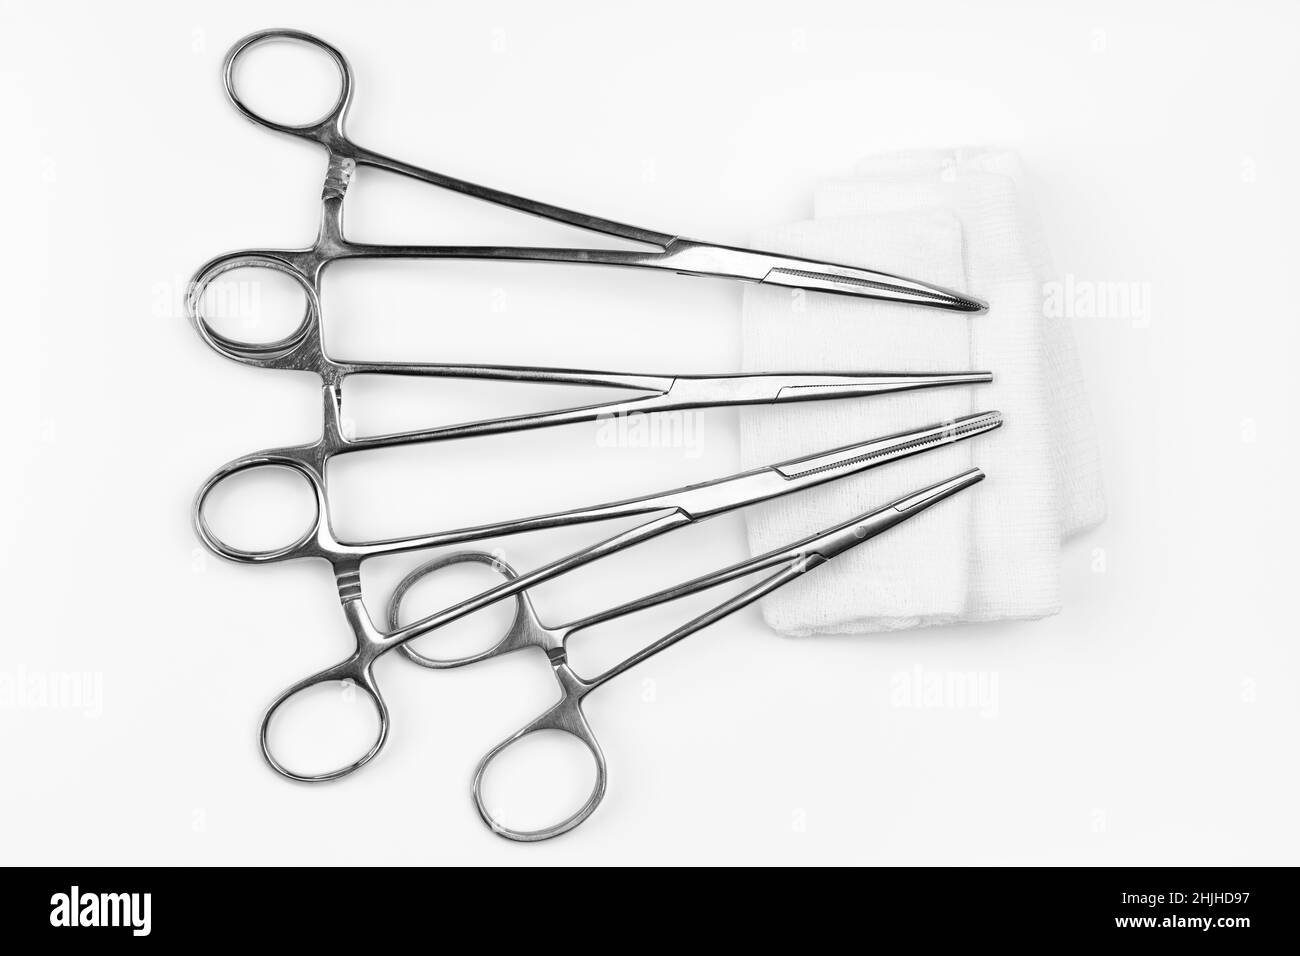 Lot of stainless surgical needle drivers lying on white sterile gauze swab. Medical instruments needle holders on white background Stock Photo